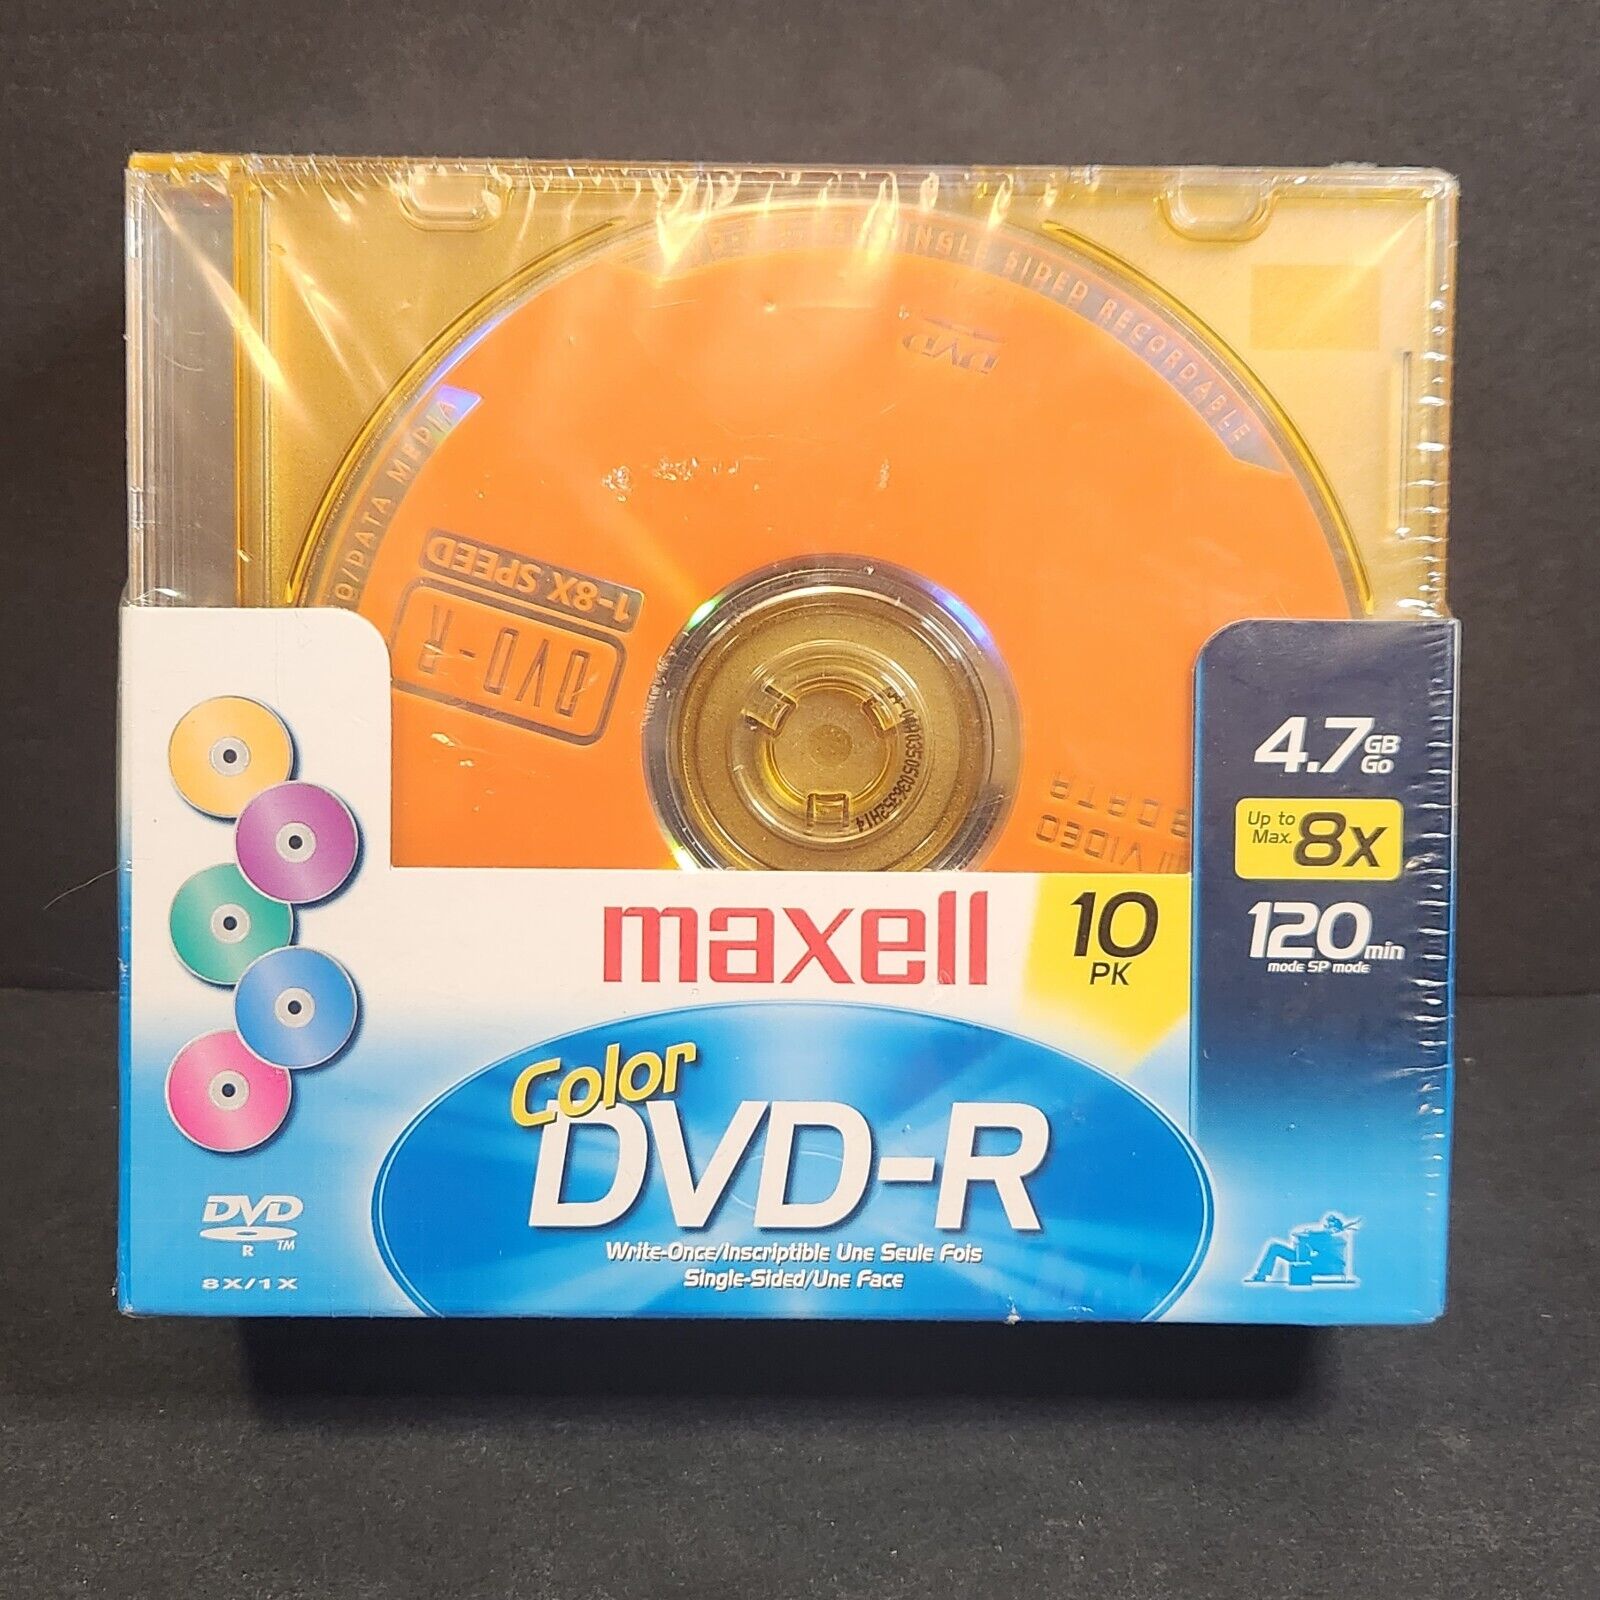 Maxell DVD-R Color 10 Pk Media Discs 4.7 GM 120 Min Up to 8X w/ Jewel Cases NEW